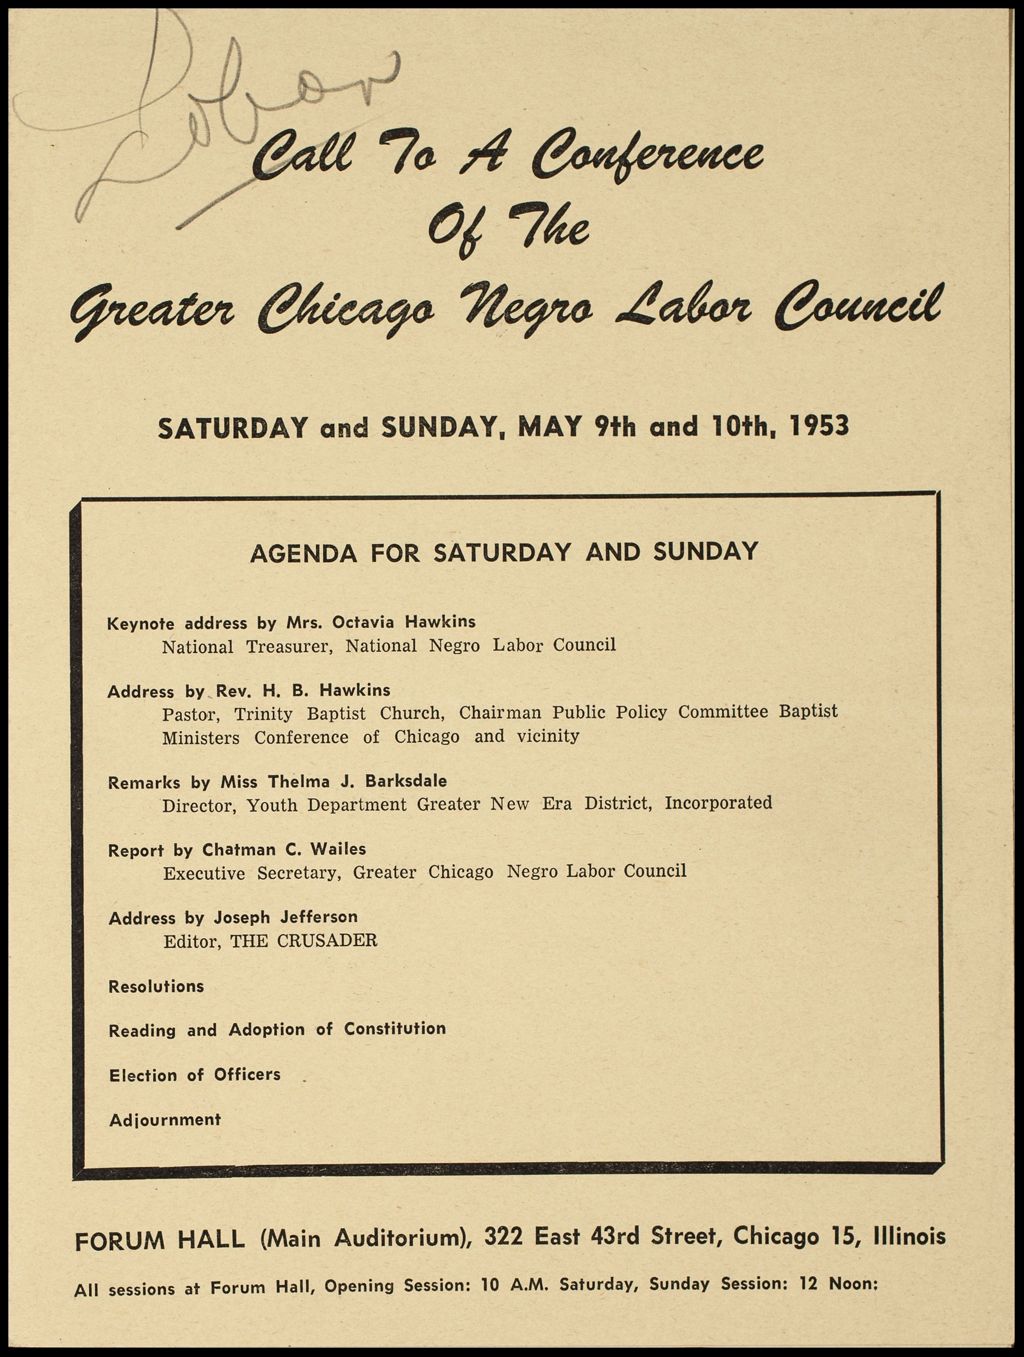 Miniature of Greater Chicago Negro Labor Council Conference, 1953 (Folder I-2713)